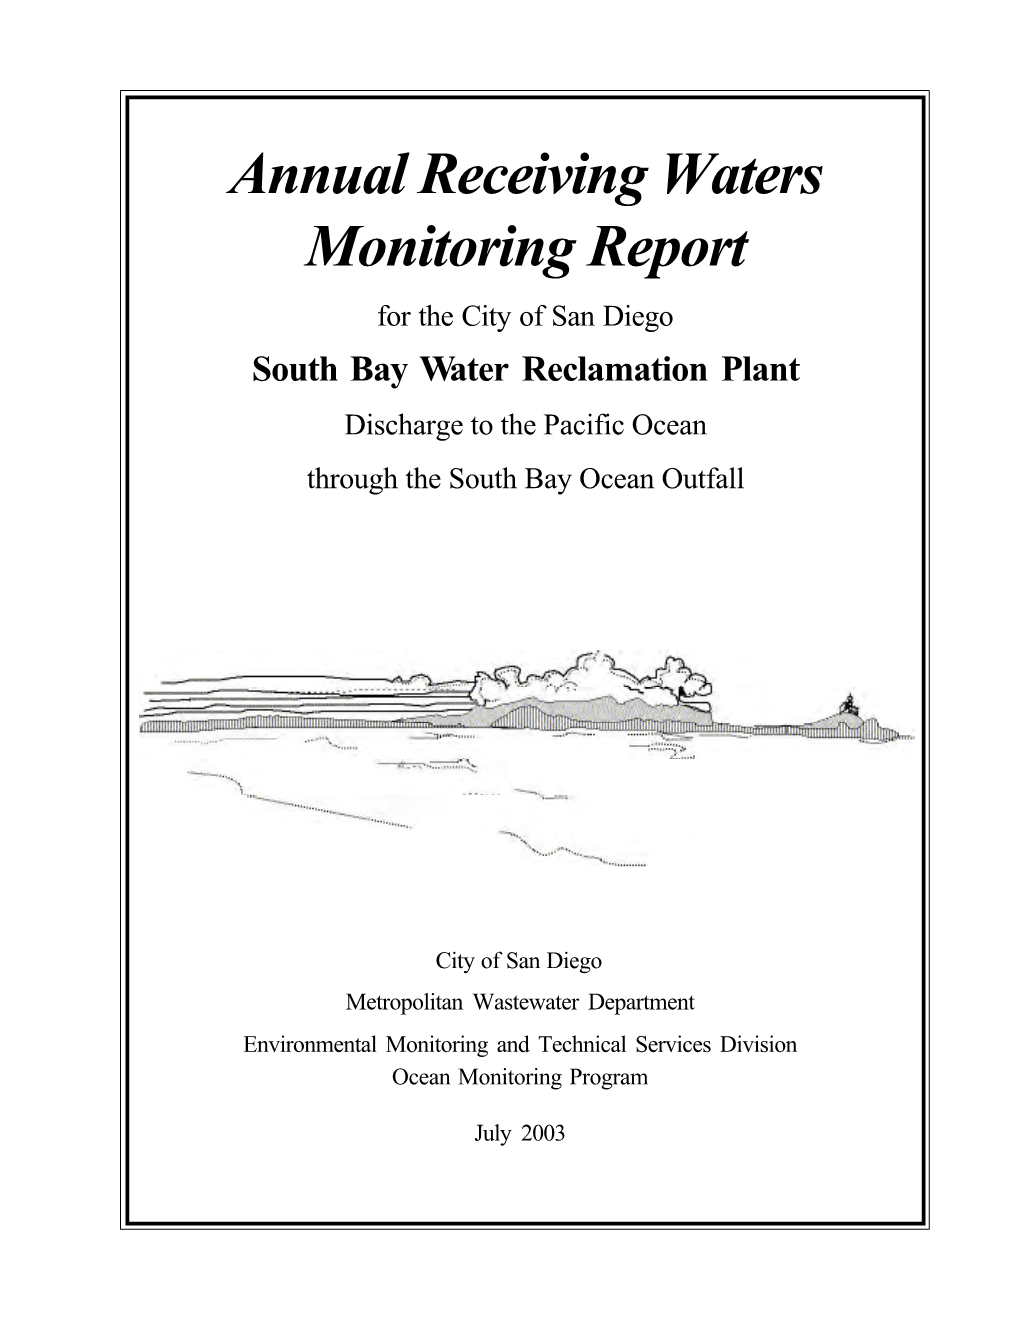 Annual Receiving Waters Monitoring Report